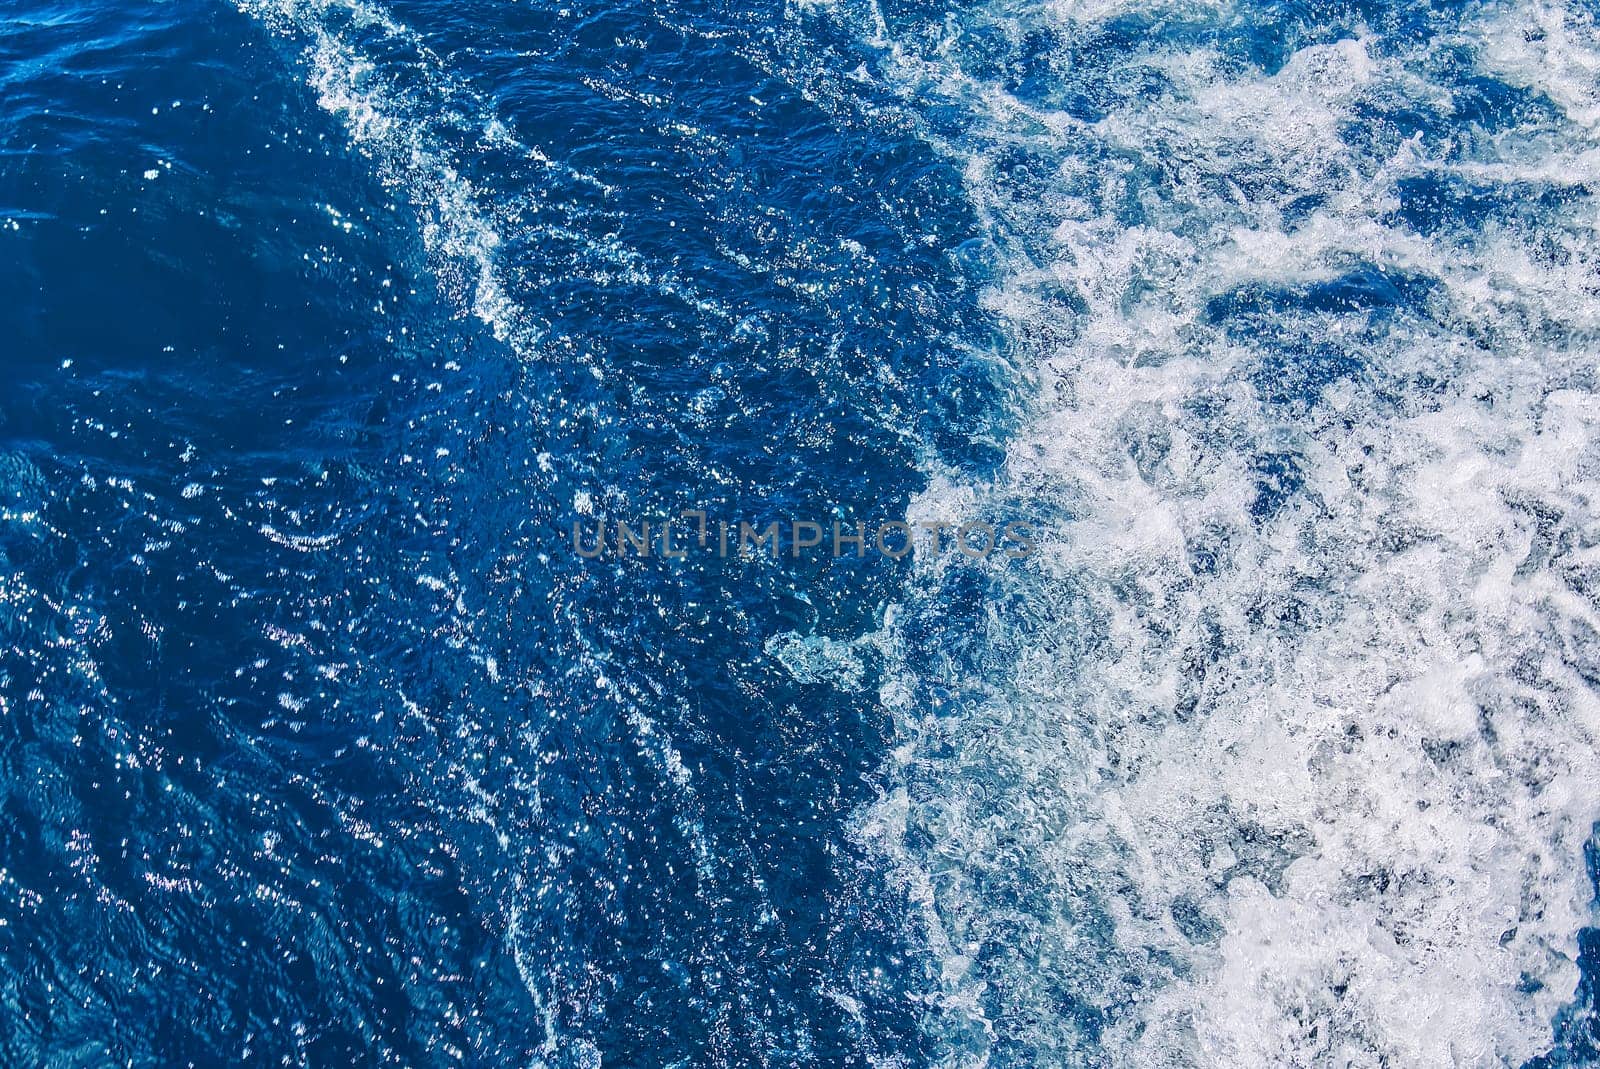 Abstract blue sea water with white waves. Blue sea texture with waves and foam. Mediterranean sea by PhotoTime